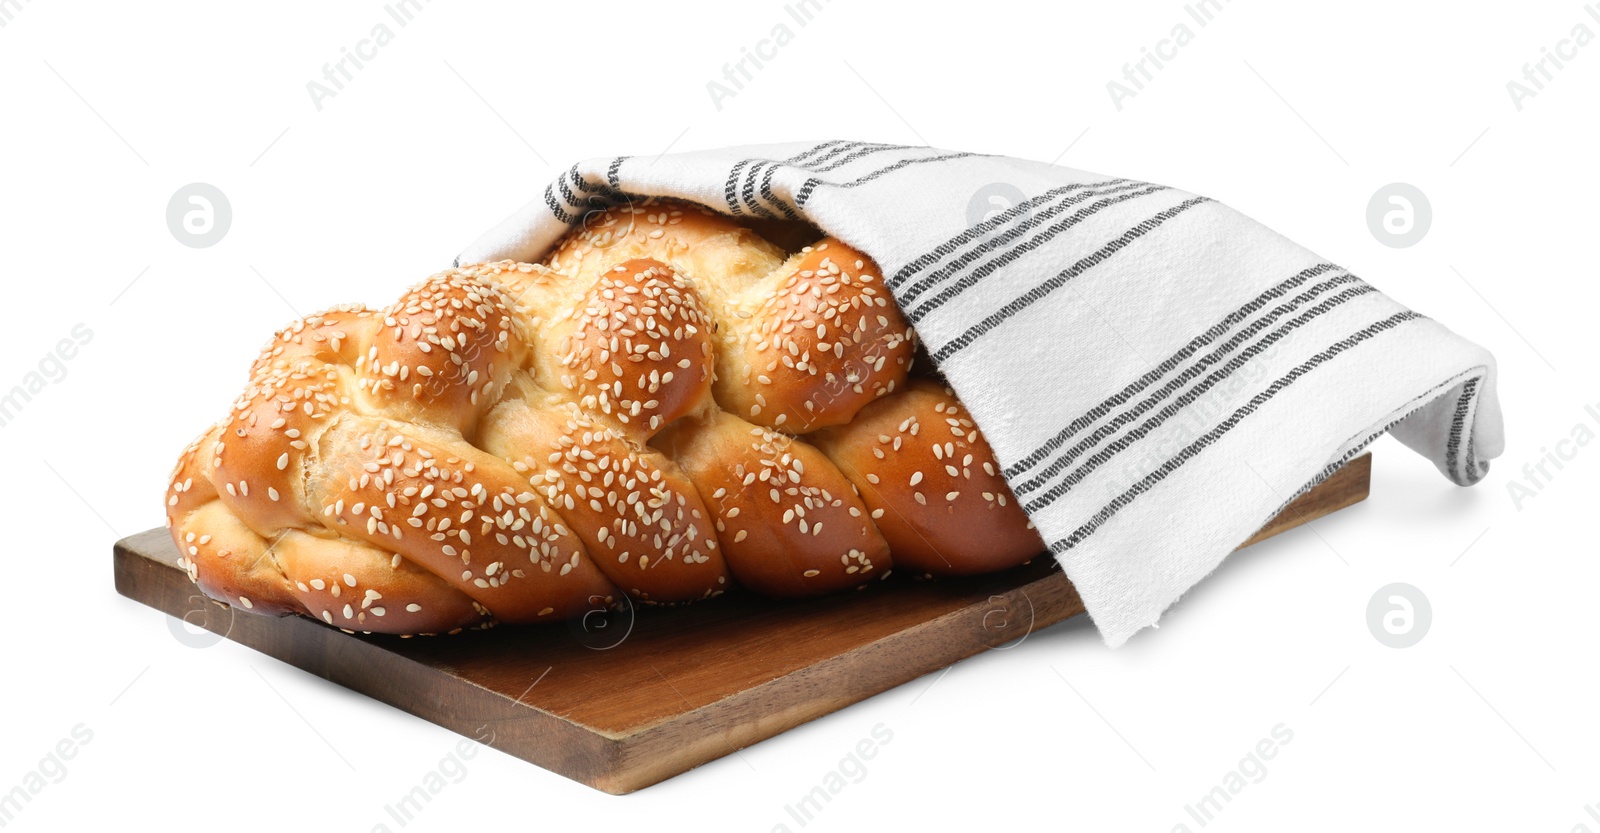 Photo of Homemade braided bread with sesame seeds and napkin isolated on white. Traditional Shabbat challah